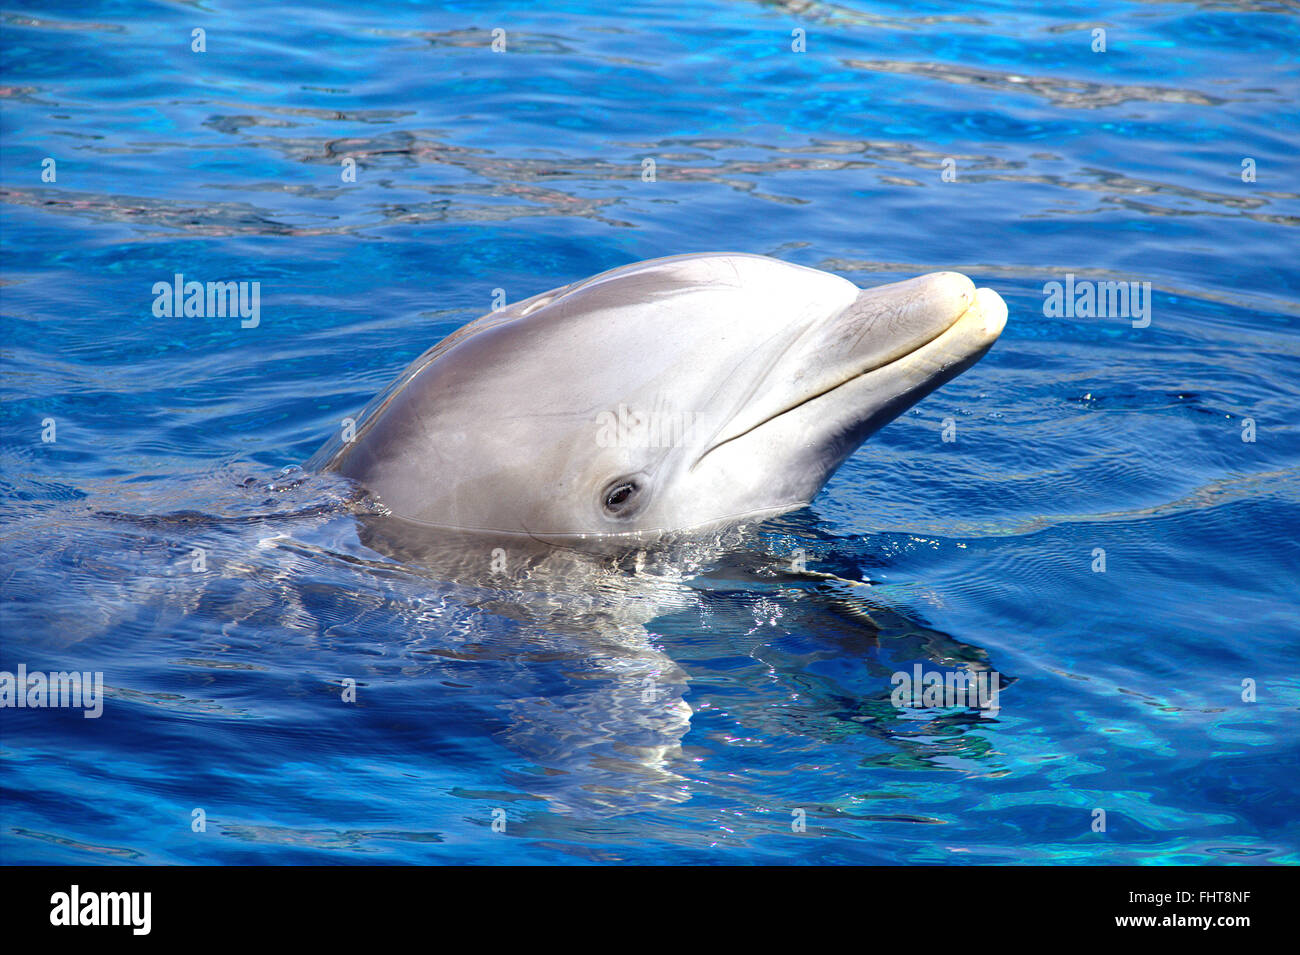 Dolphin in the water. Dolphin Aquarium of Genoa with his head above water. Stock Photo